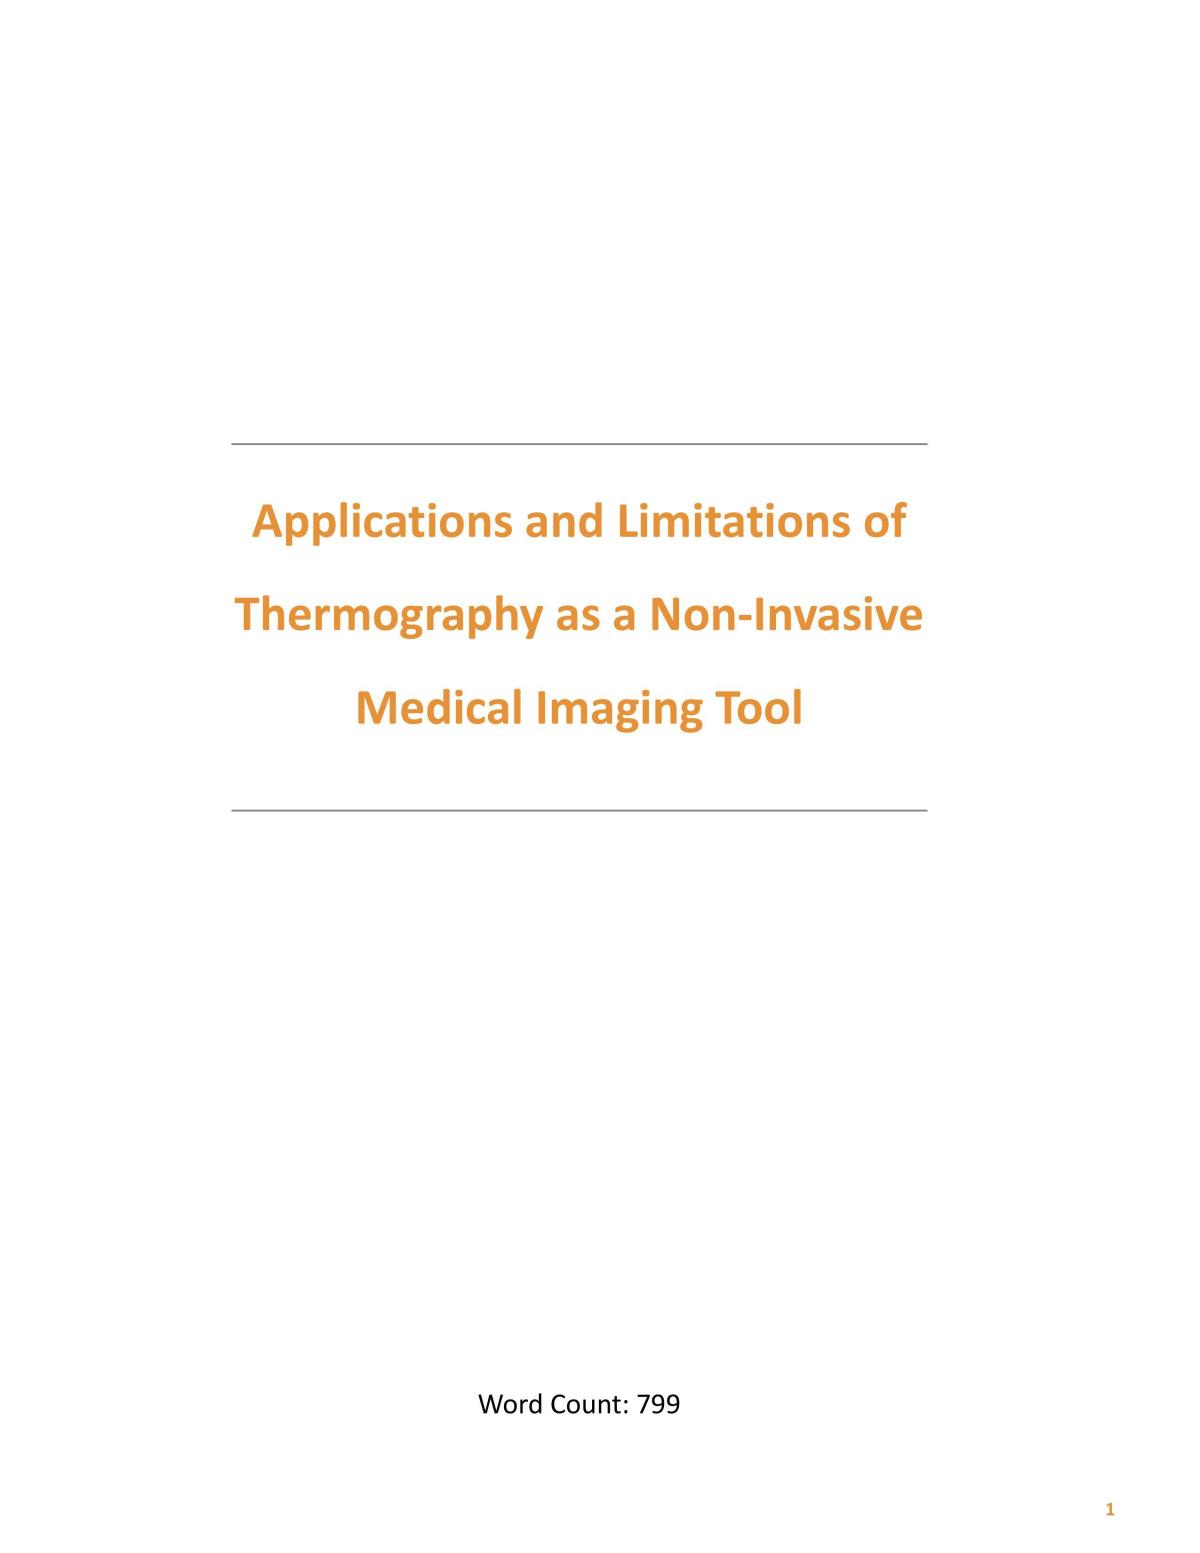 Non-Invasive Medical Imaging Tools SHE Task - Page 1